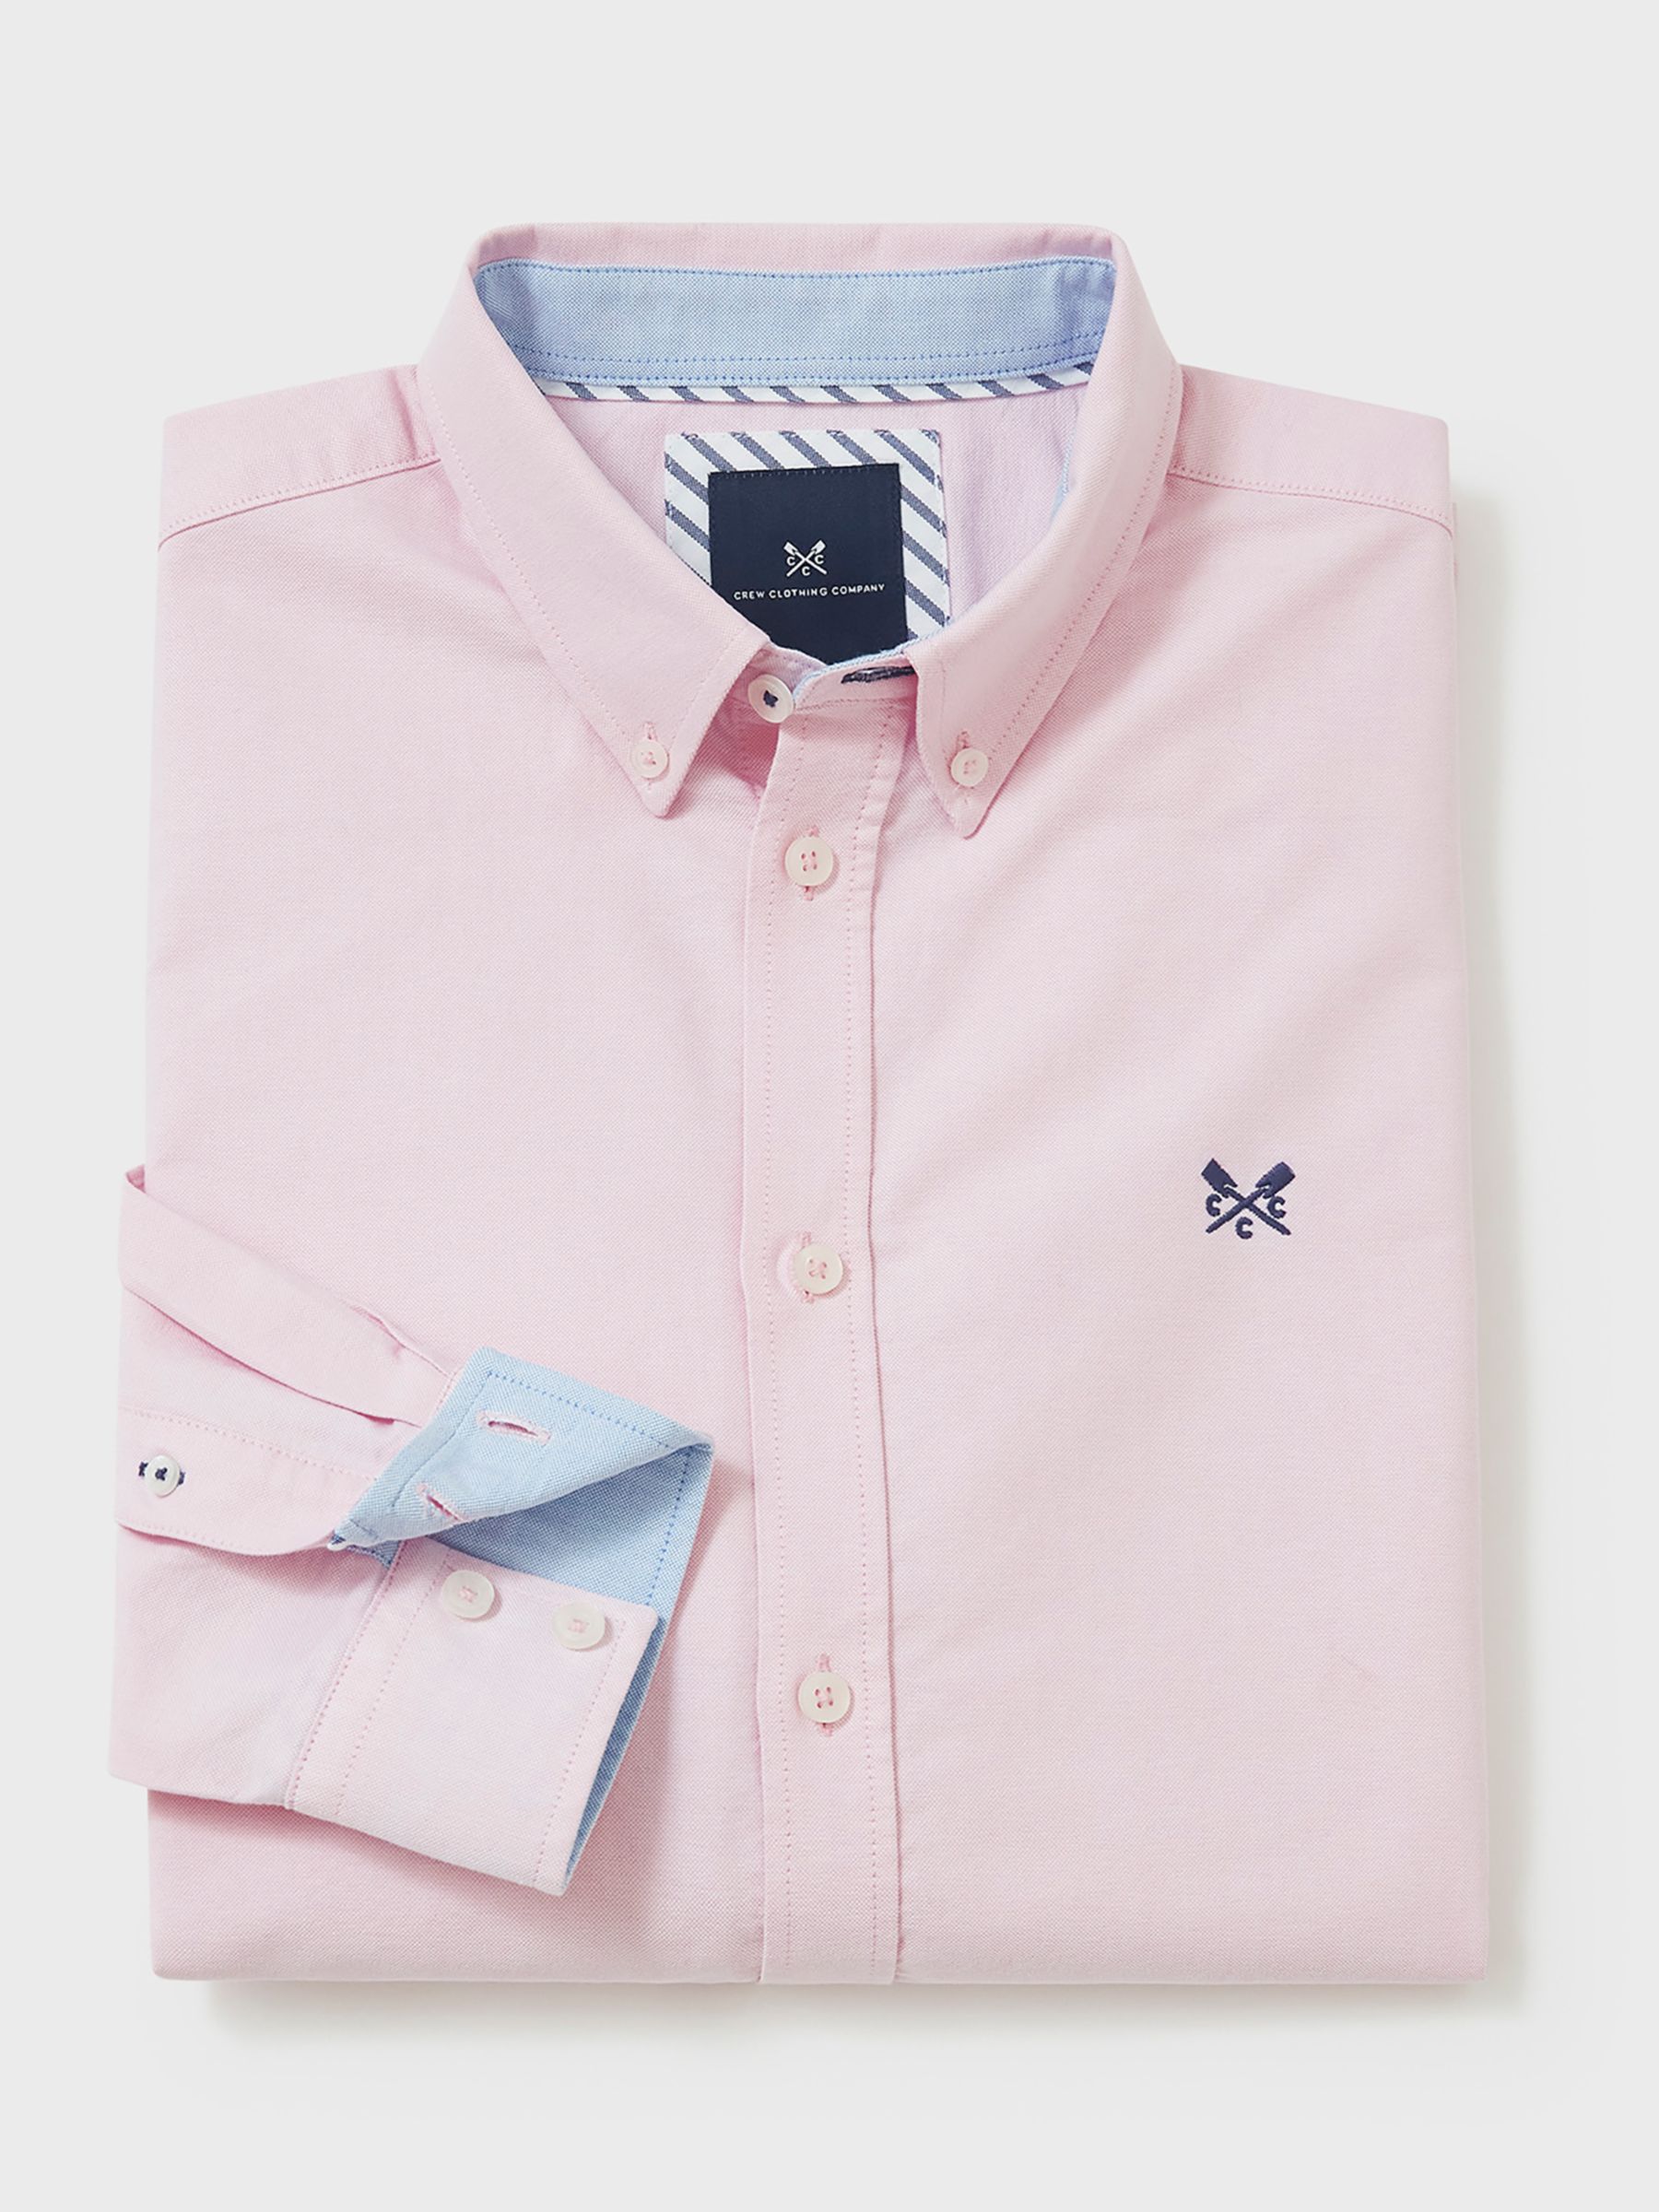 Crew Clothing Classic Fit Oxford Shirt, Pink, XS